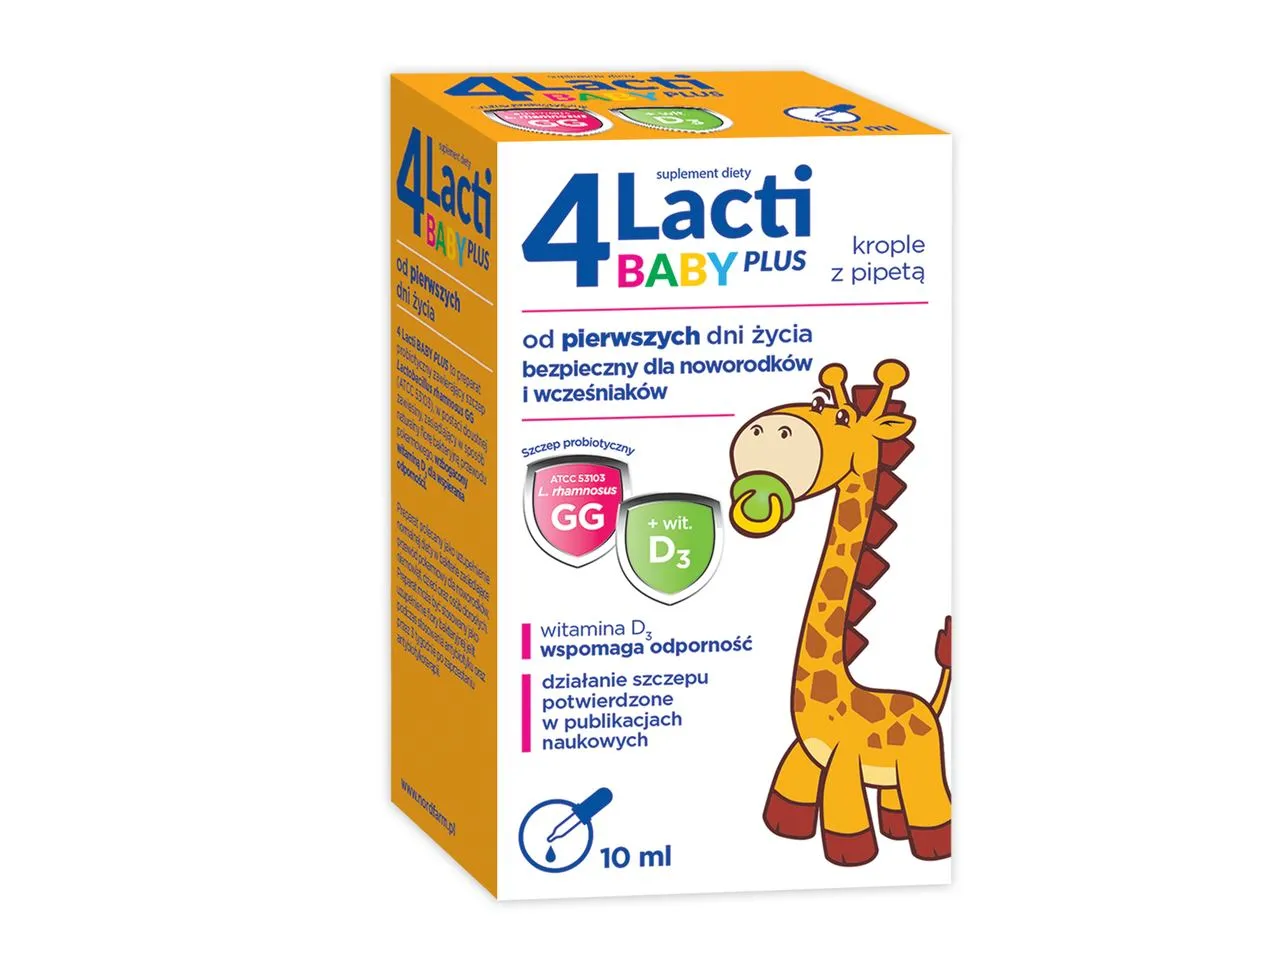 4 Lacti Baby Plus, suplement diety, 10 ml